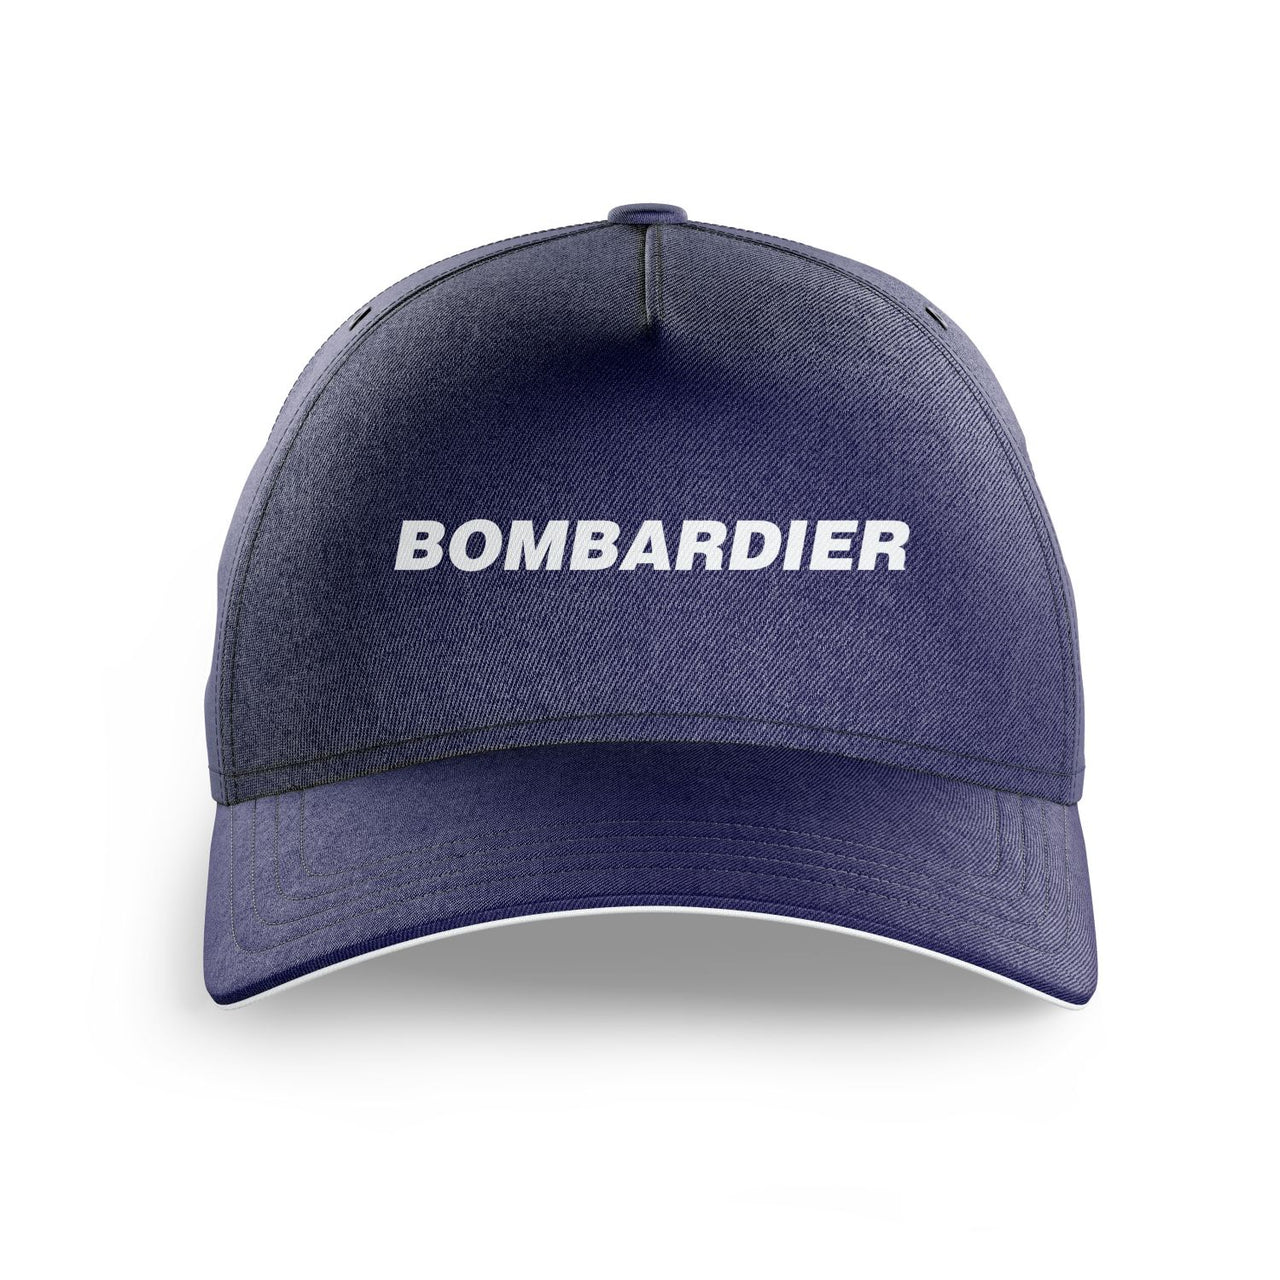 Bombardier & Text Printed Hats